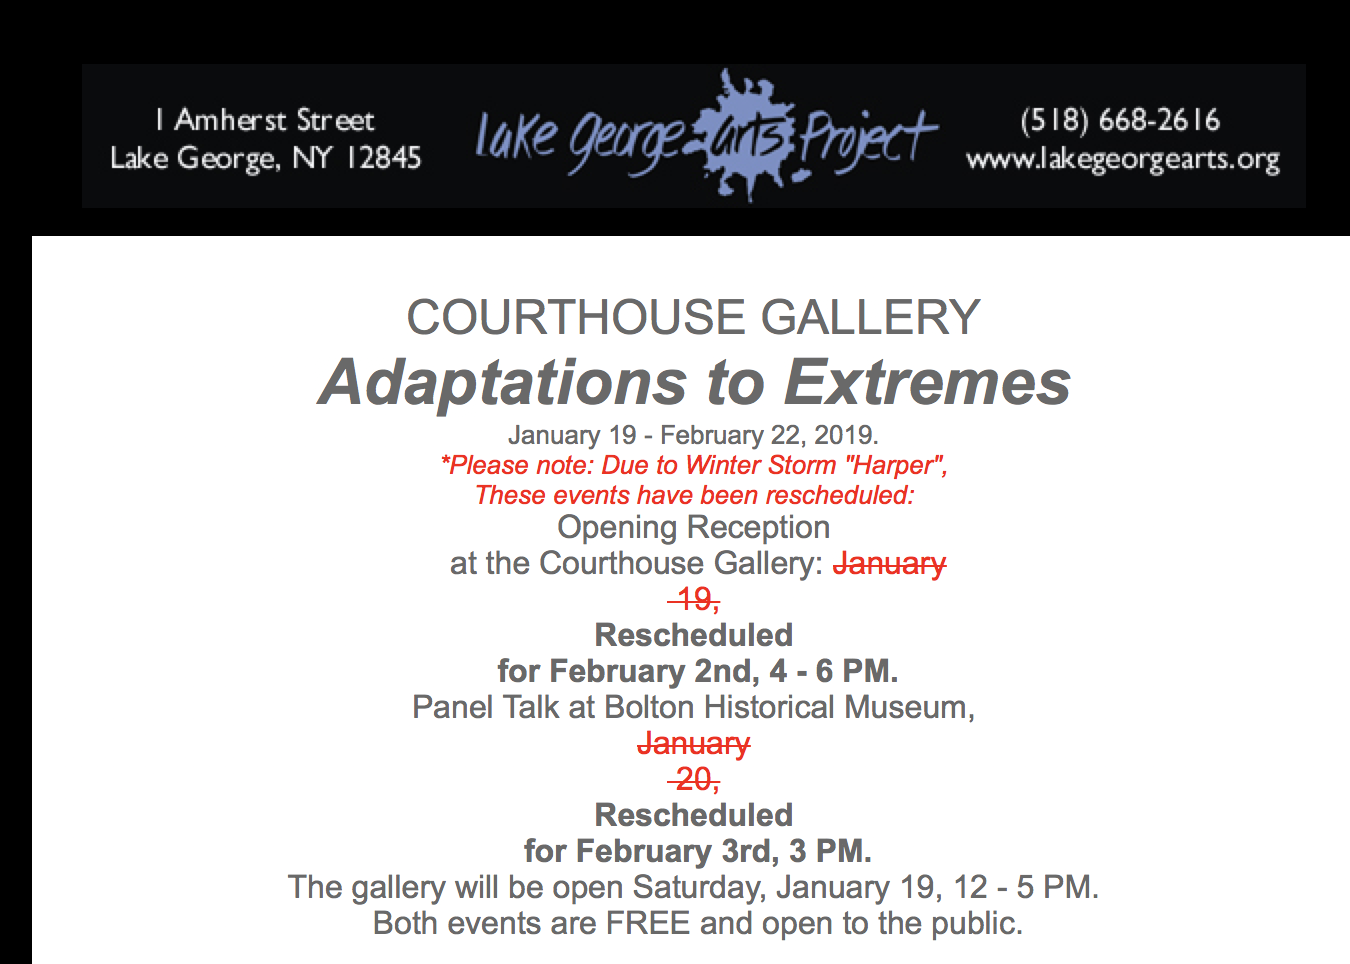 A screengrab of an email invitation for an art exhibition called "Adaptations to Extremes" in which the opening reception and panel talk have been rescheduled because of a winter storm.